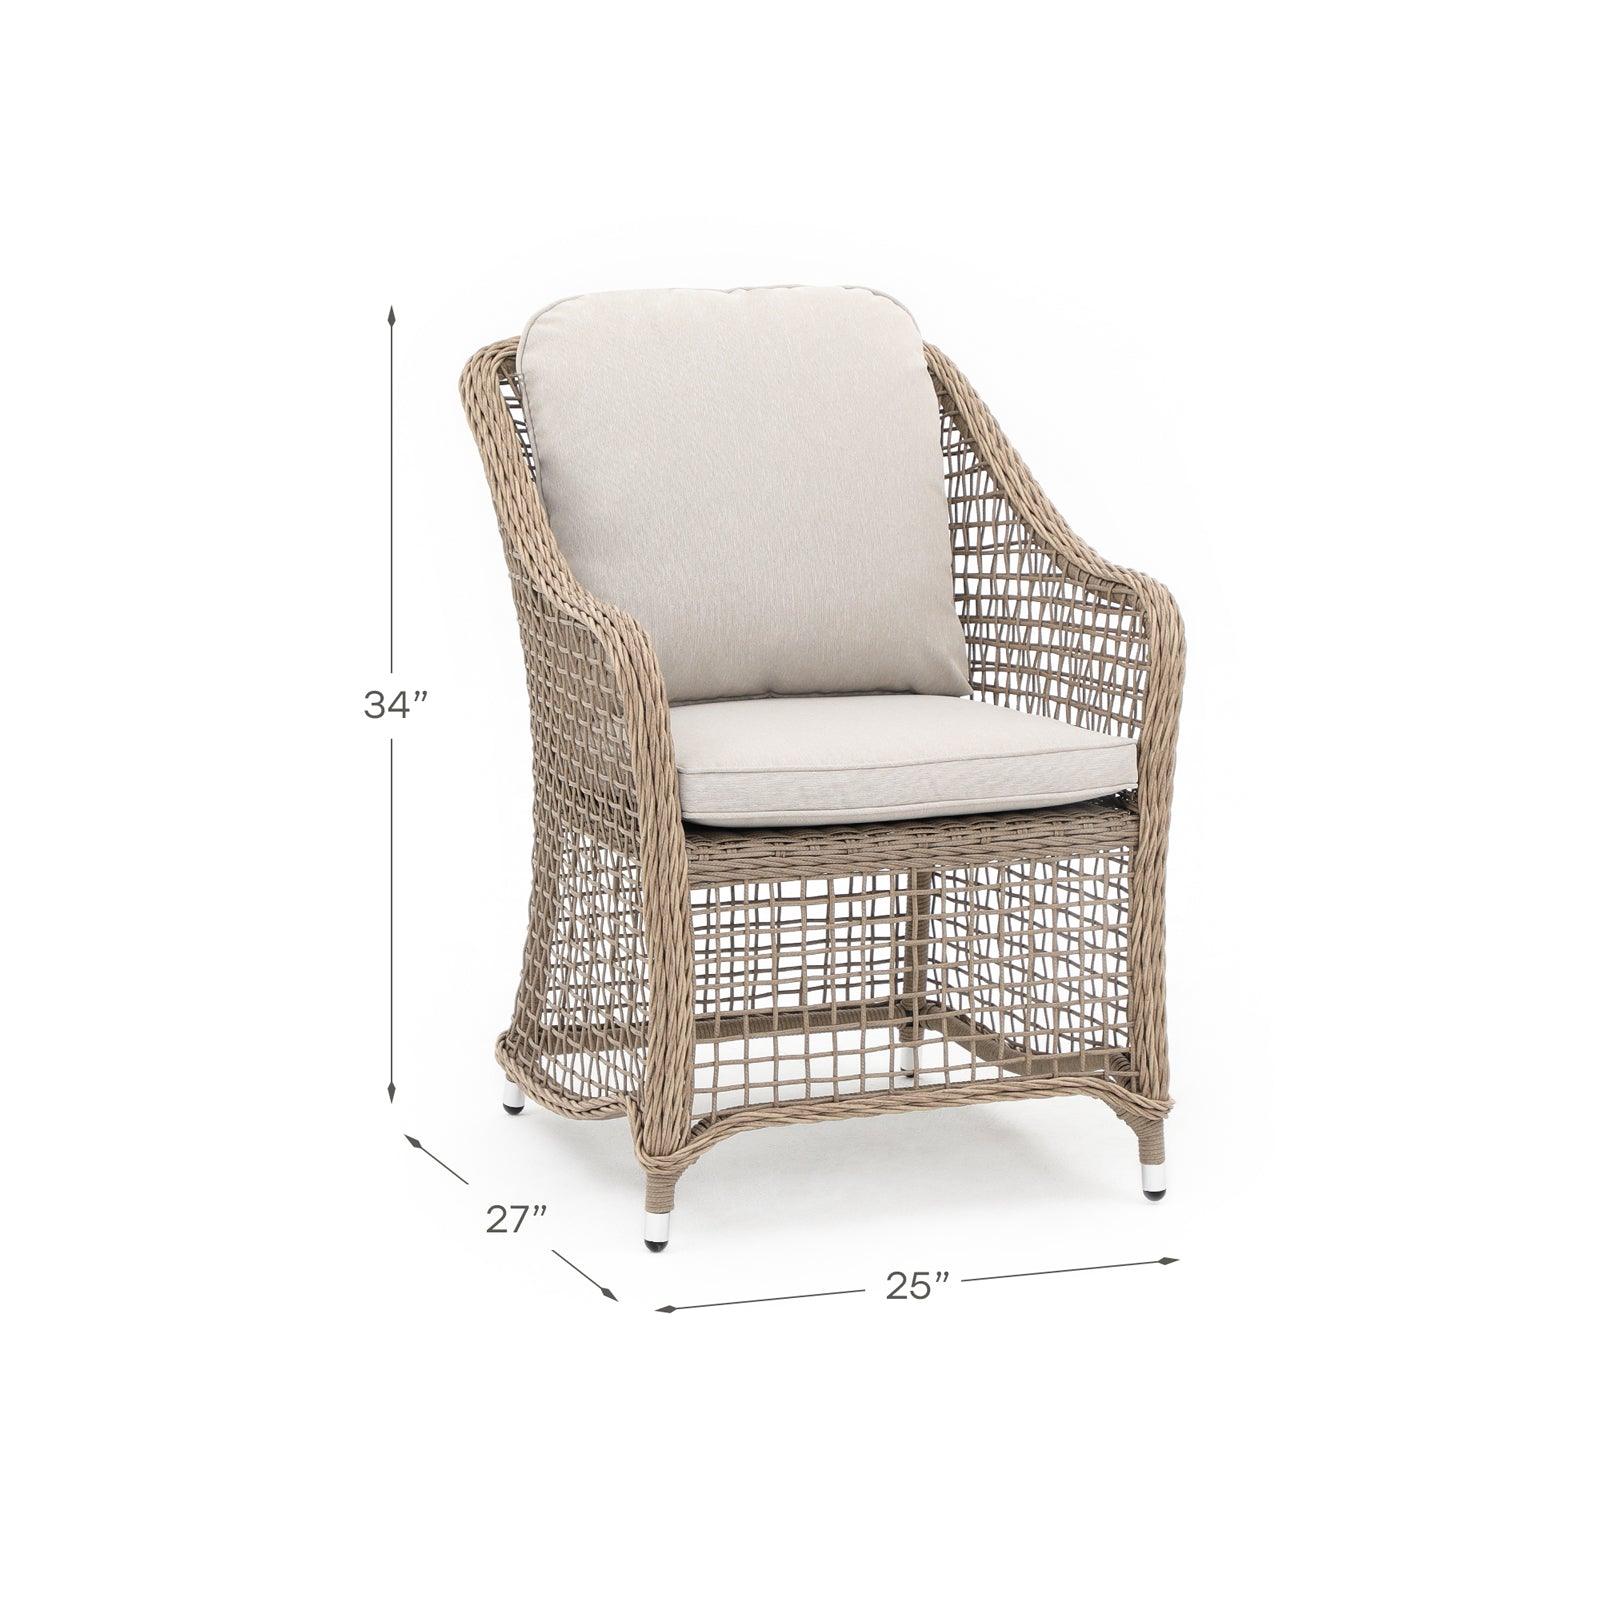 Irati natural color wicker outdoor dining chair with aluminum frame, Creamy-white cushions, left - Jardina Furniture#color_Natural